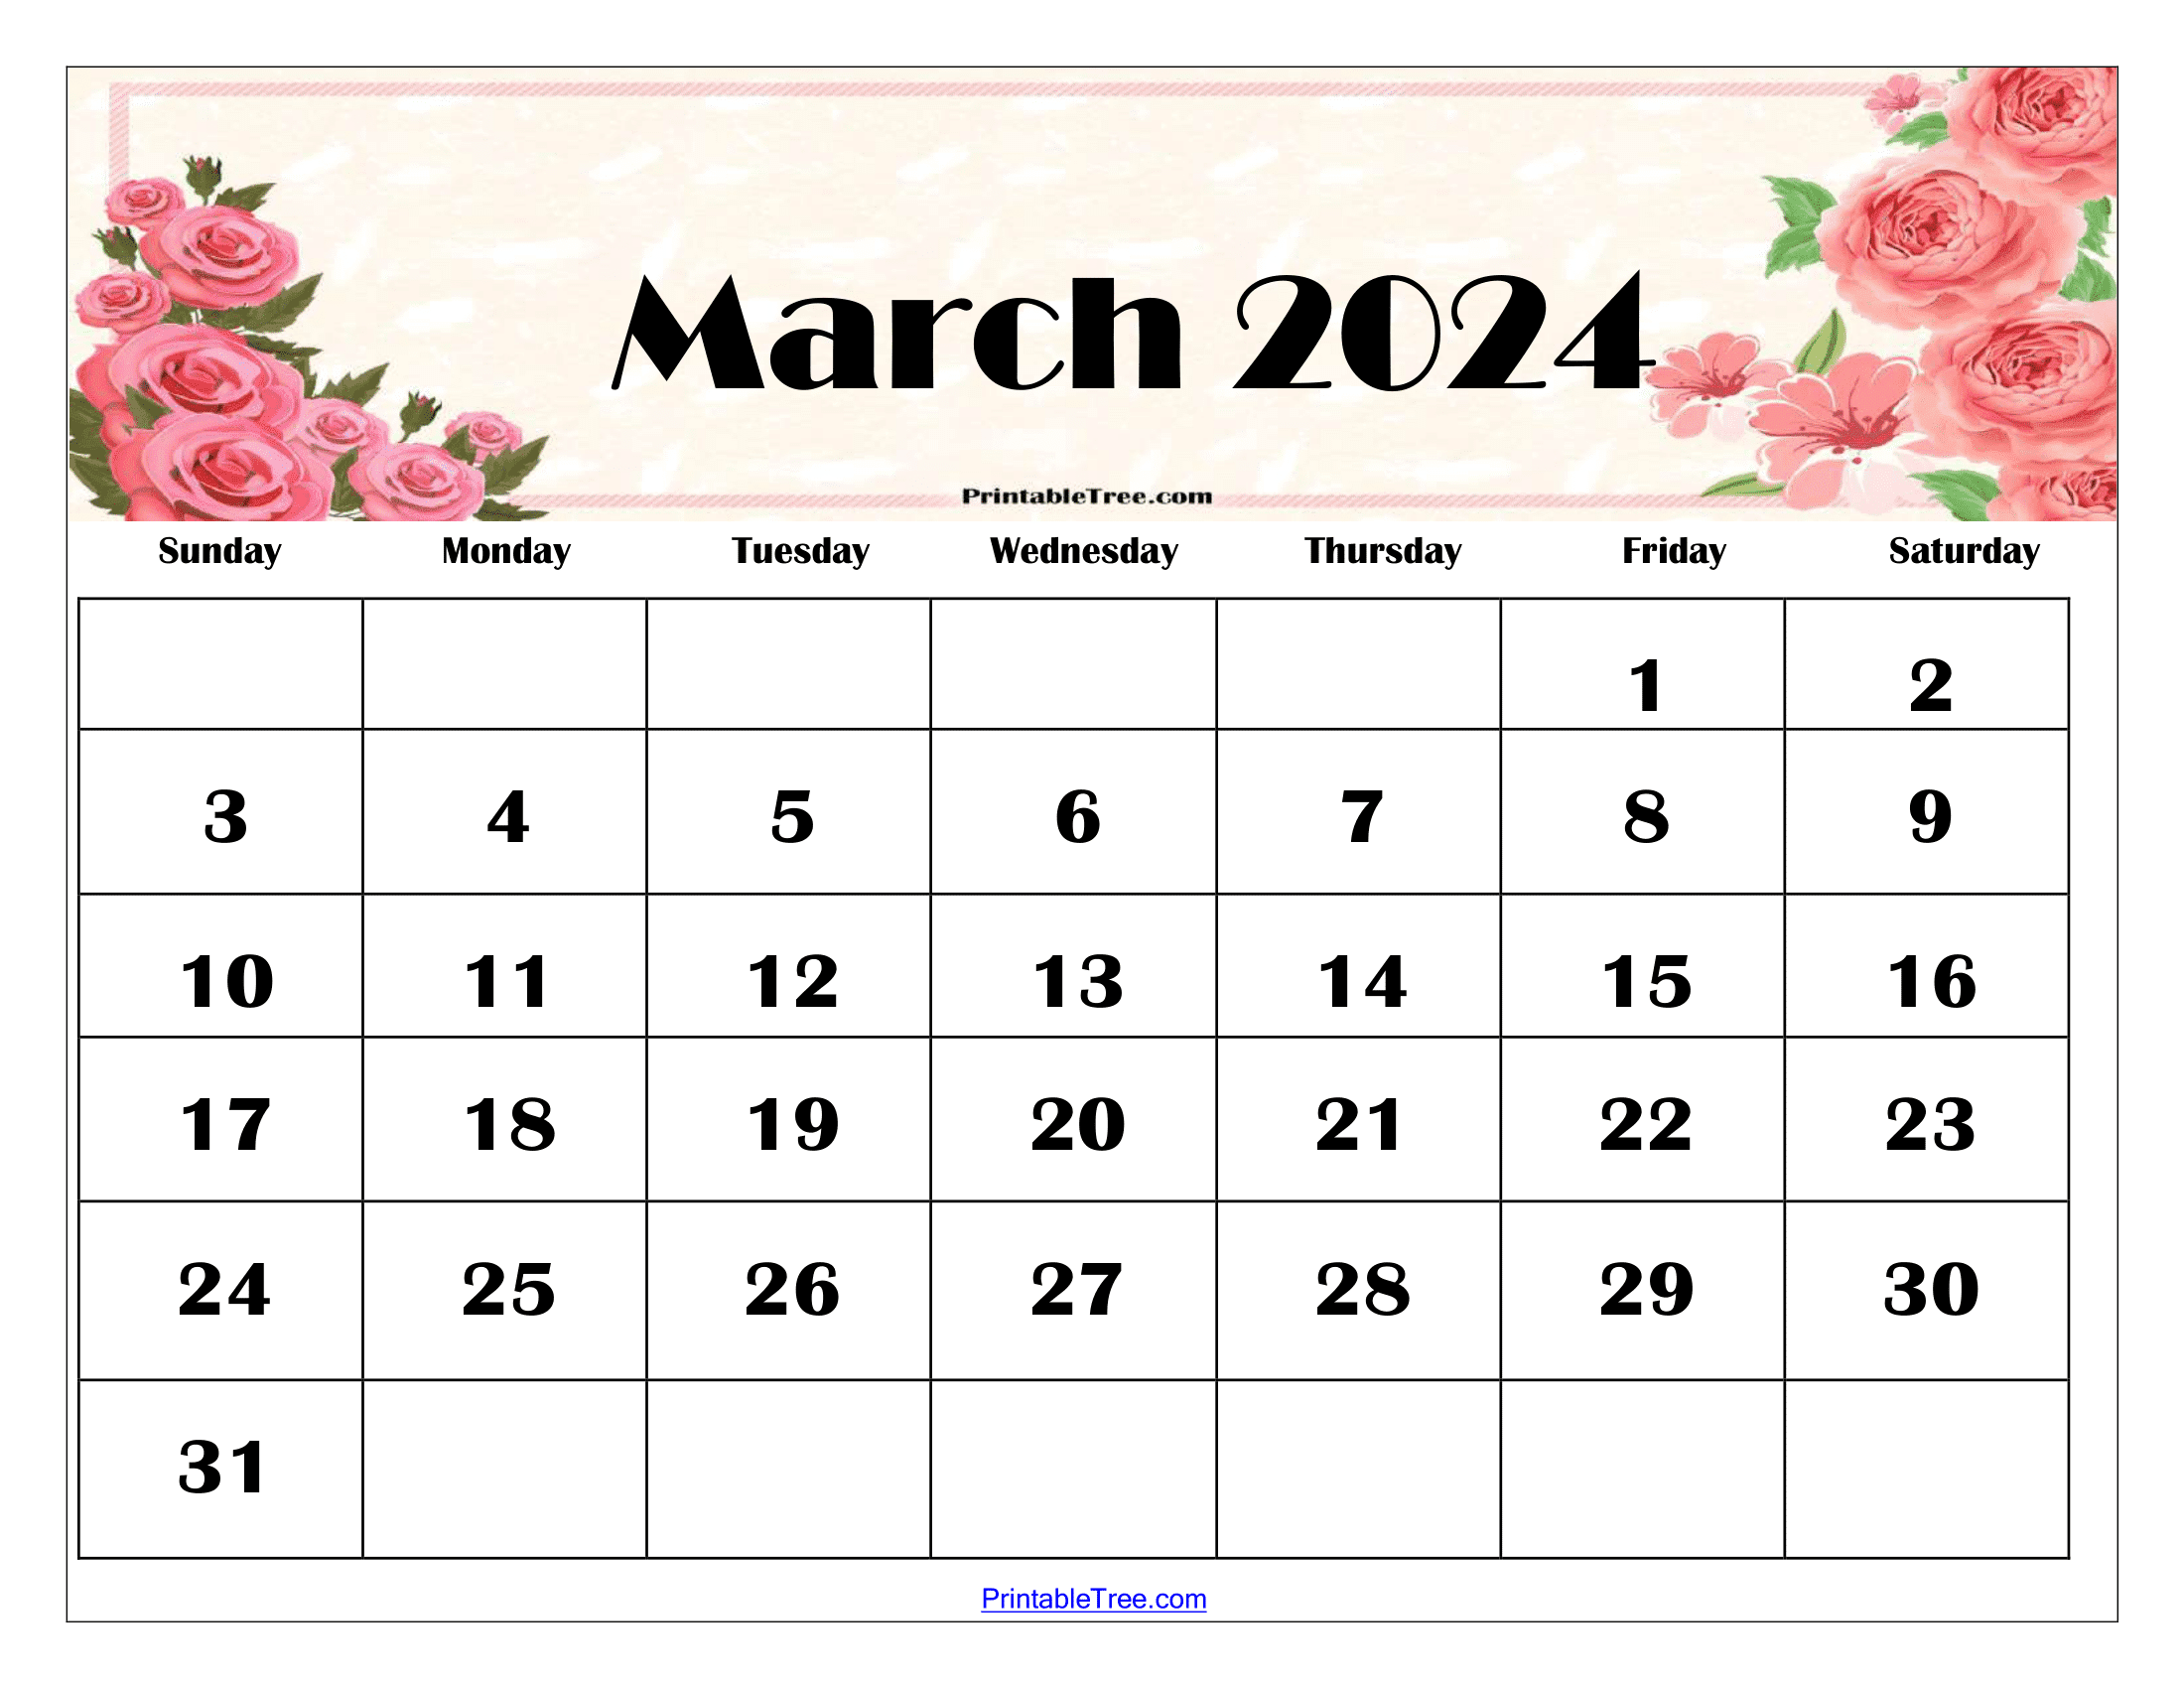 March 2024 Calendar Printable Pdf With Holidays Template Free for March 2024 Calendar Printable Cute